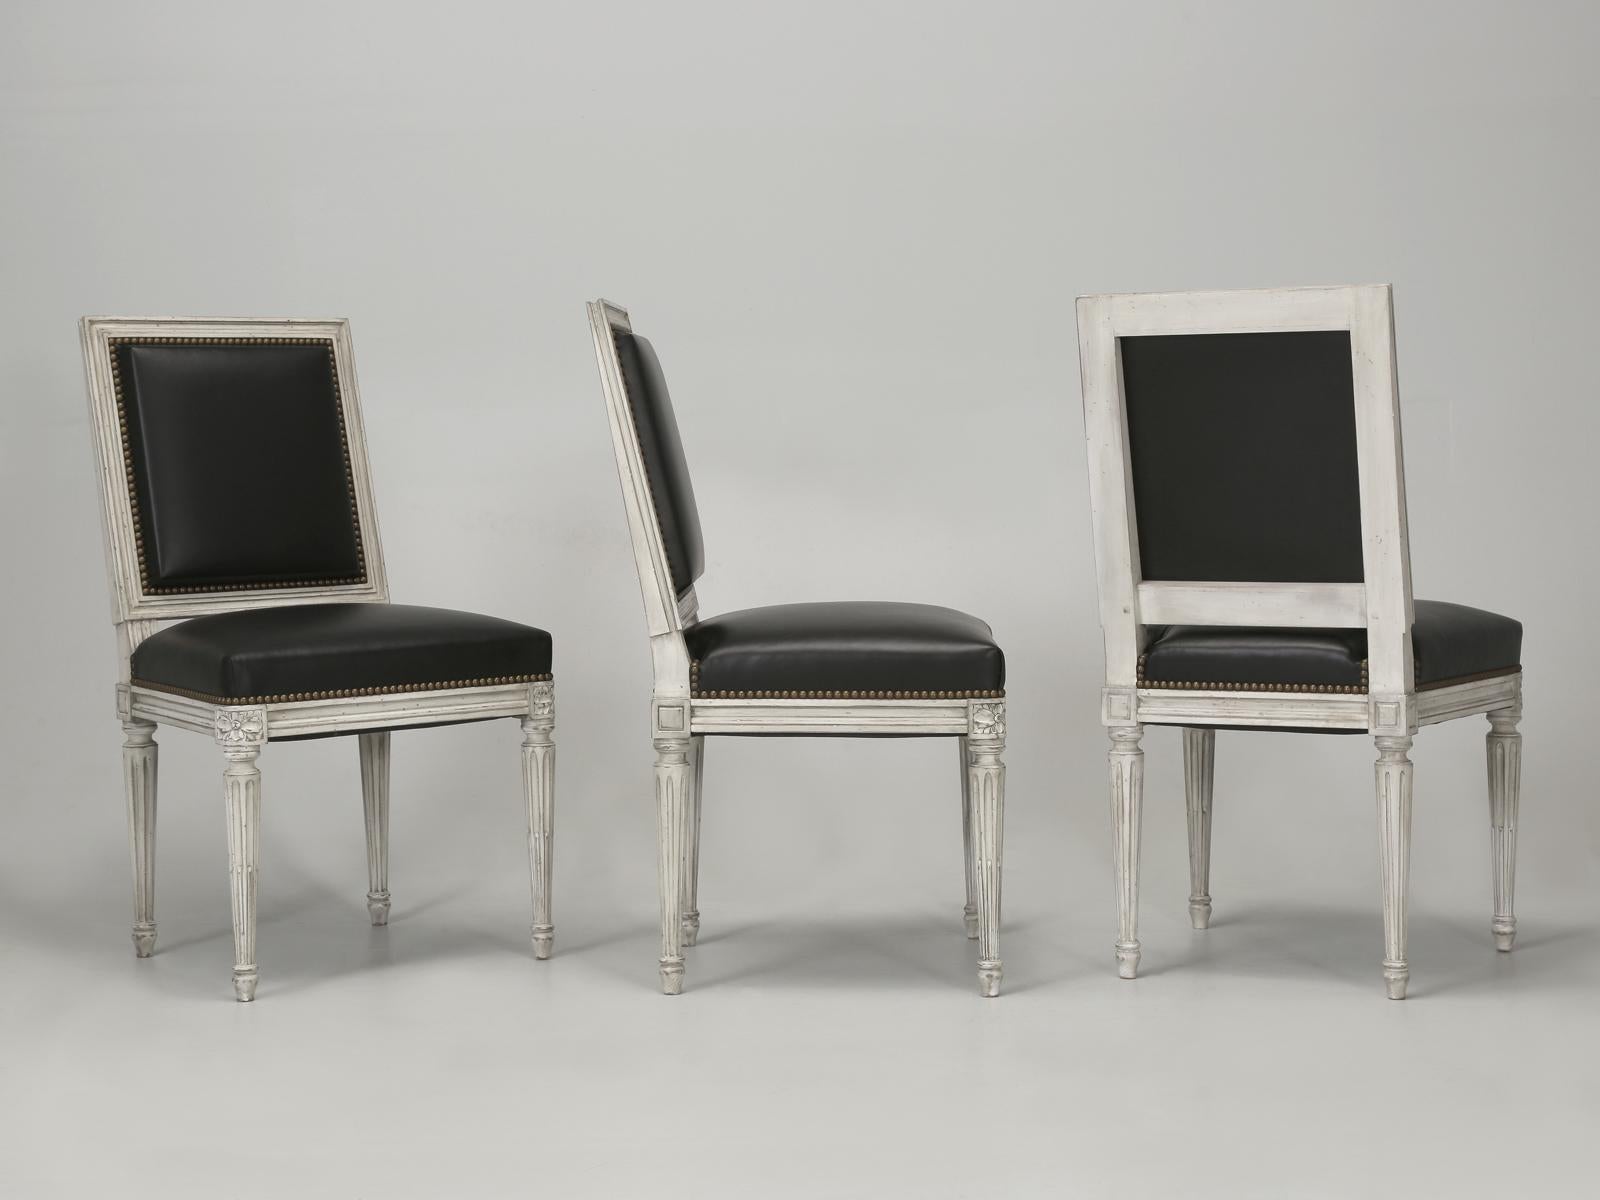 French Louis XVI style dining chairs in your choice of finishes and upholstery. Old Plank had been for decades trying to find a “comfortable, by American standards” Louis XVI dining side chair. Your typical vintage (c1900’s) French Louis XVI style